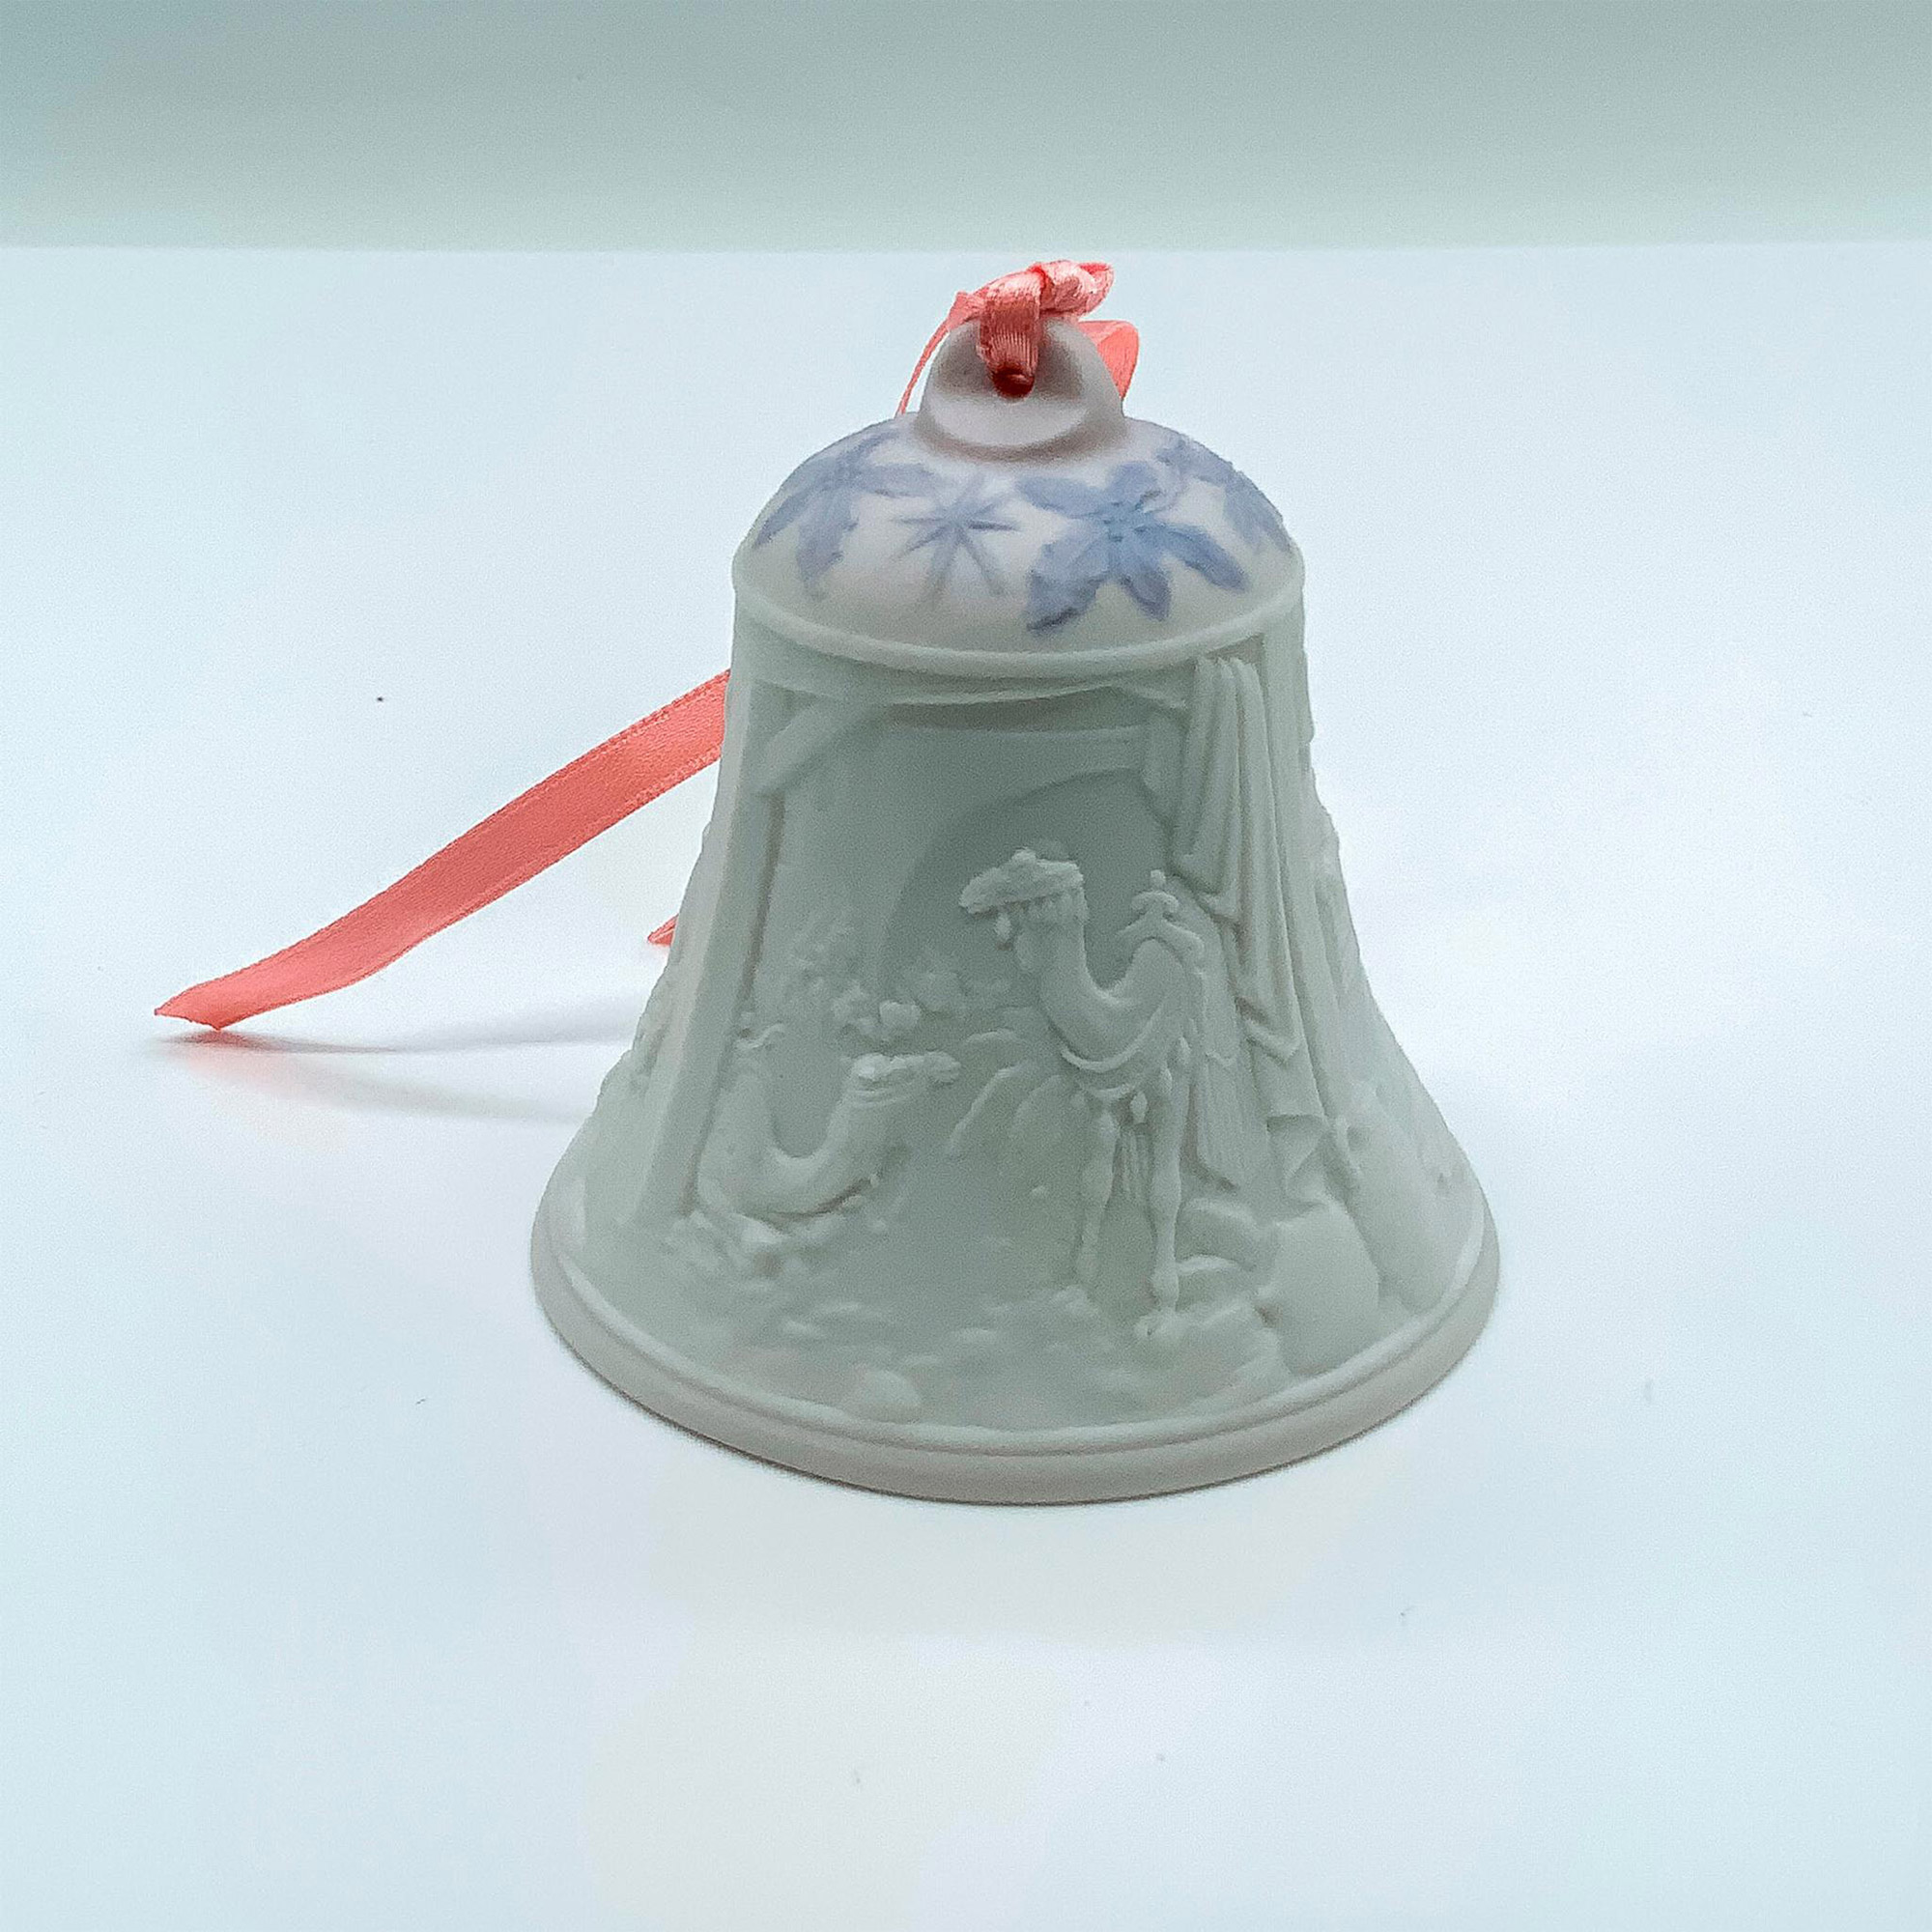 1997 Christmas Bell 1016441 - Lladro Porcelain Ornament - Image 2 of 3